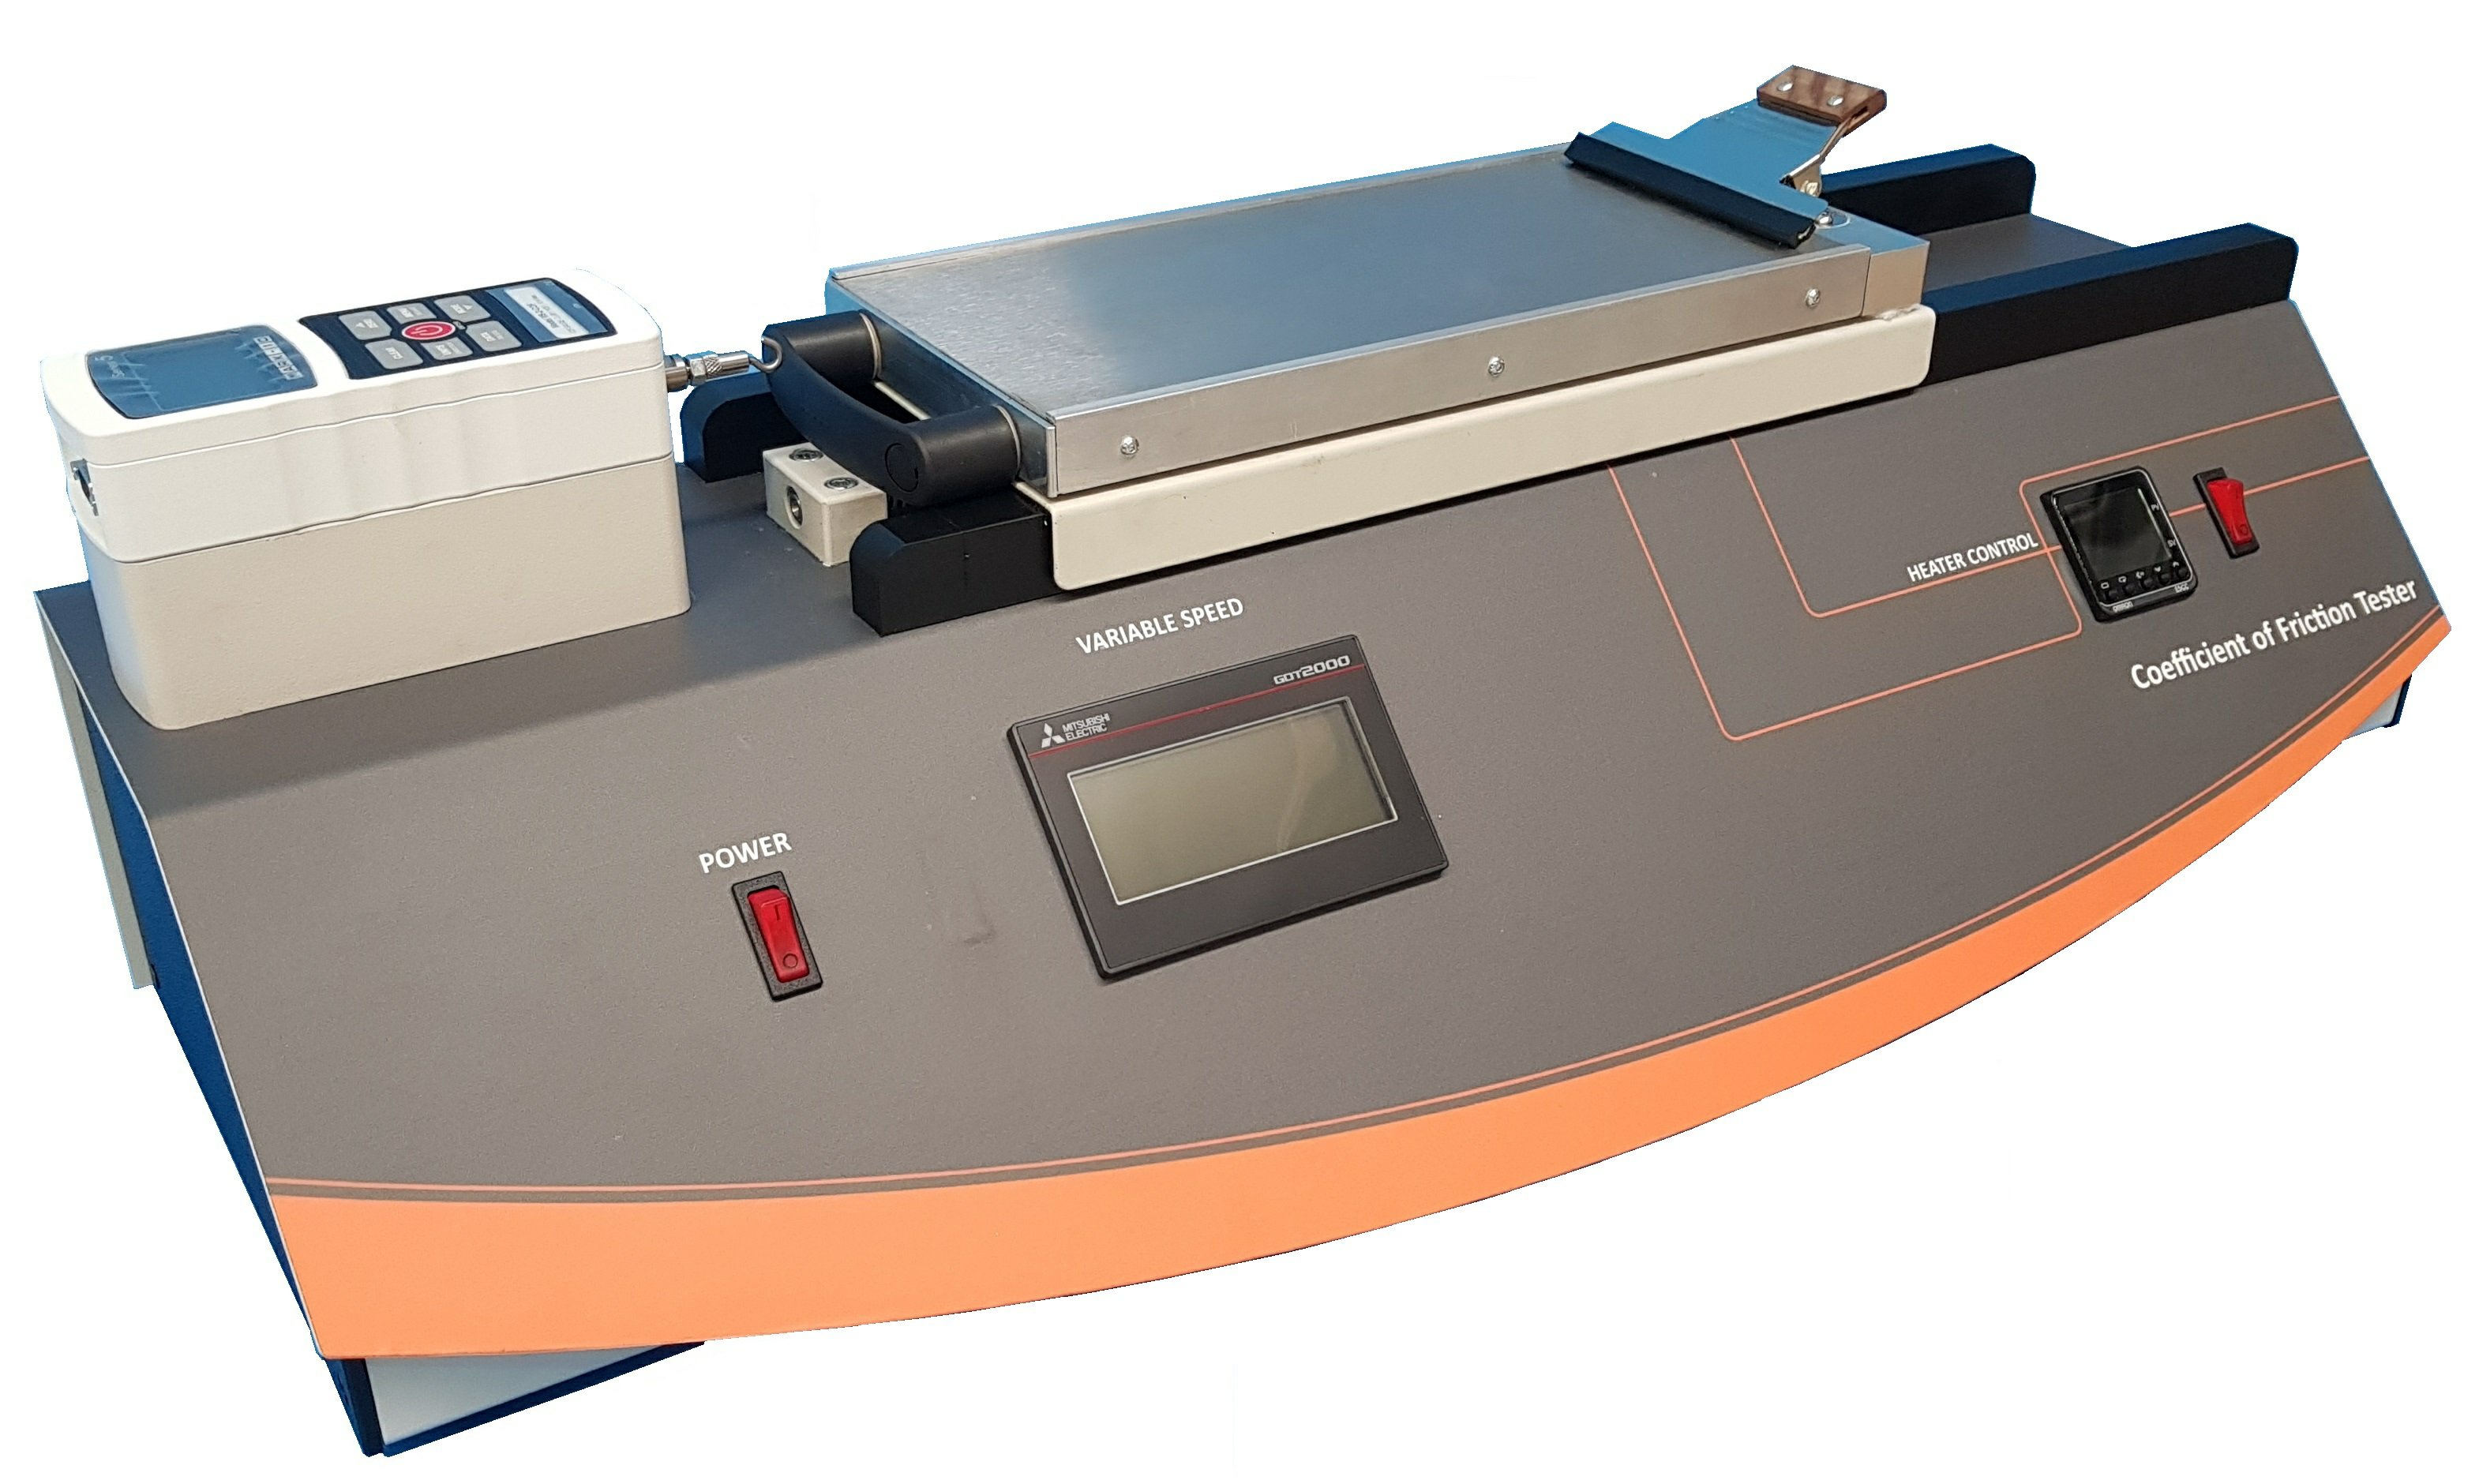 Coefficient of Friction Tester with Variable Speed & Heated Platen